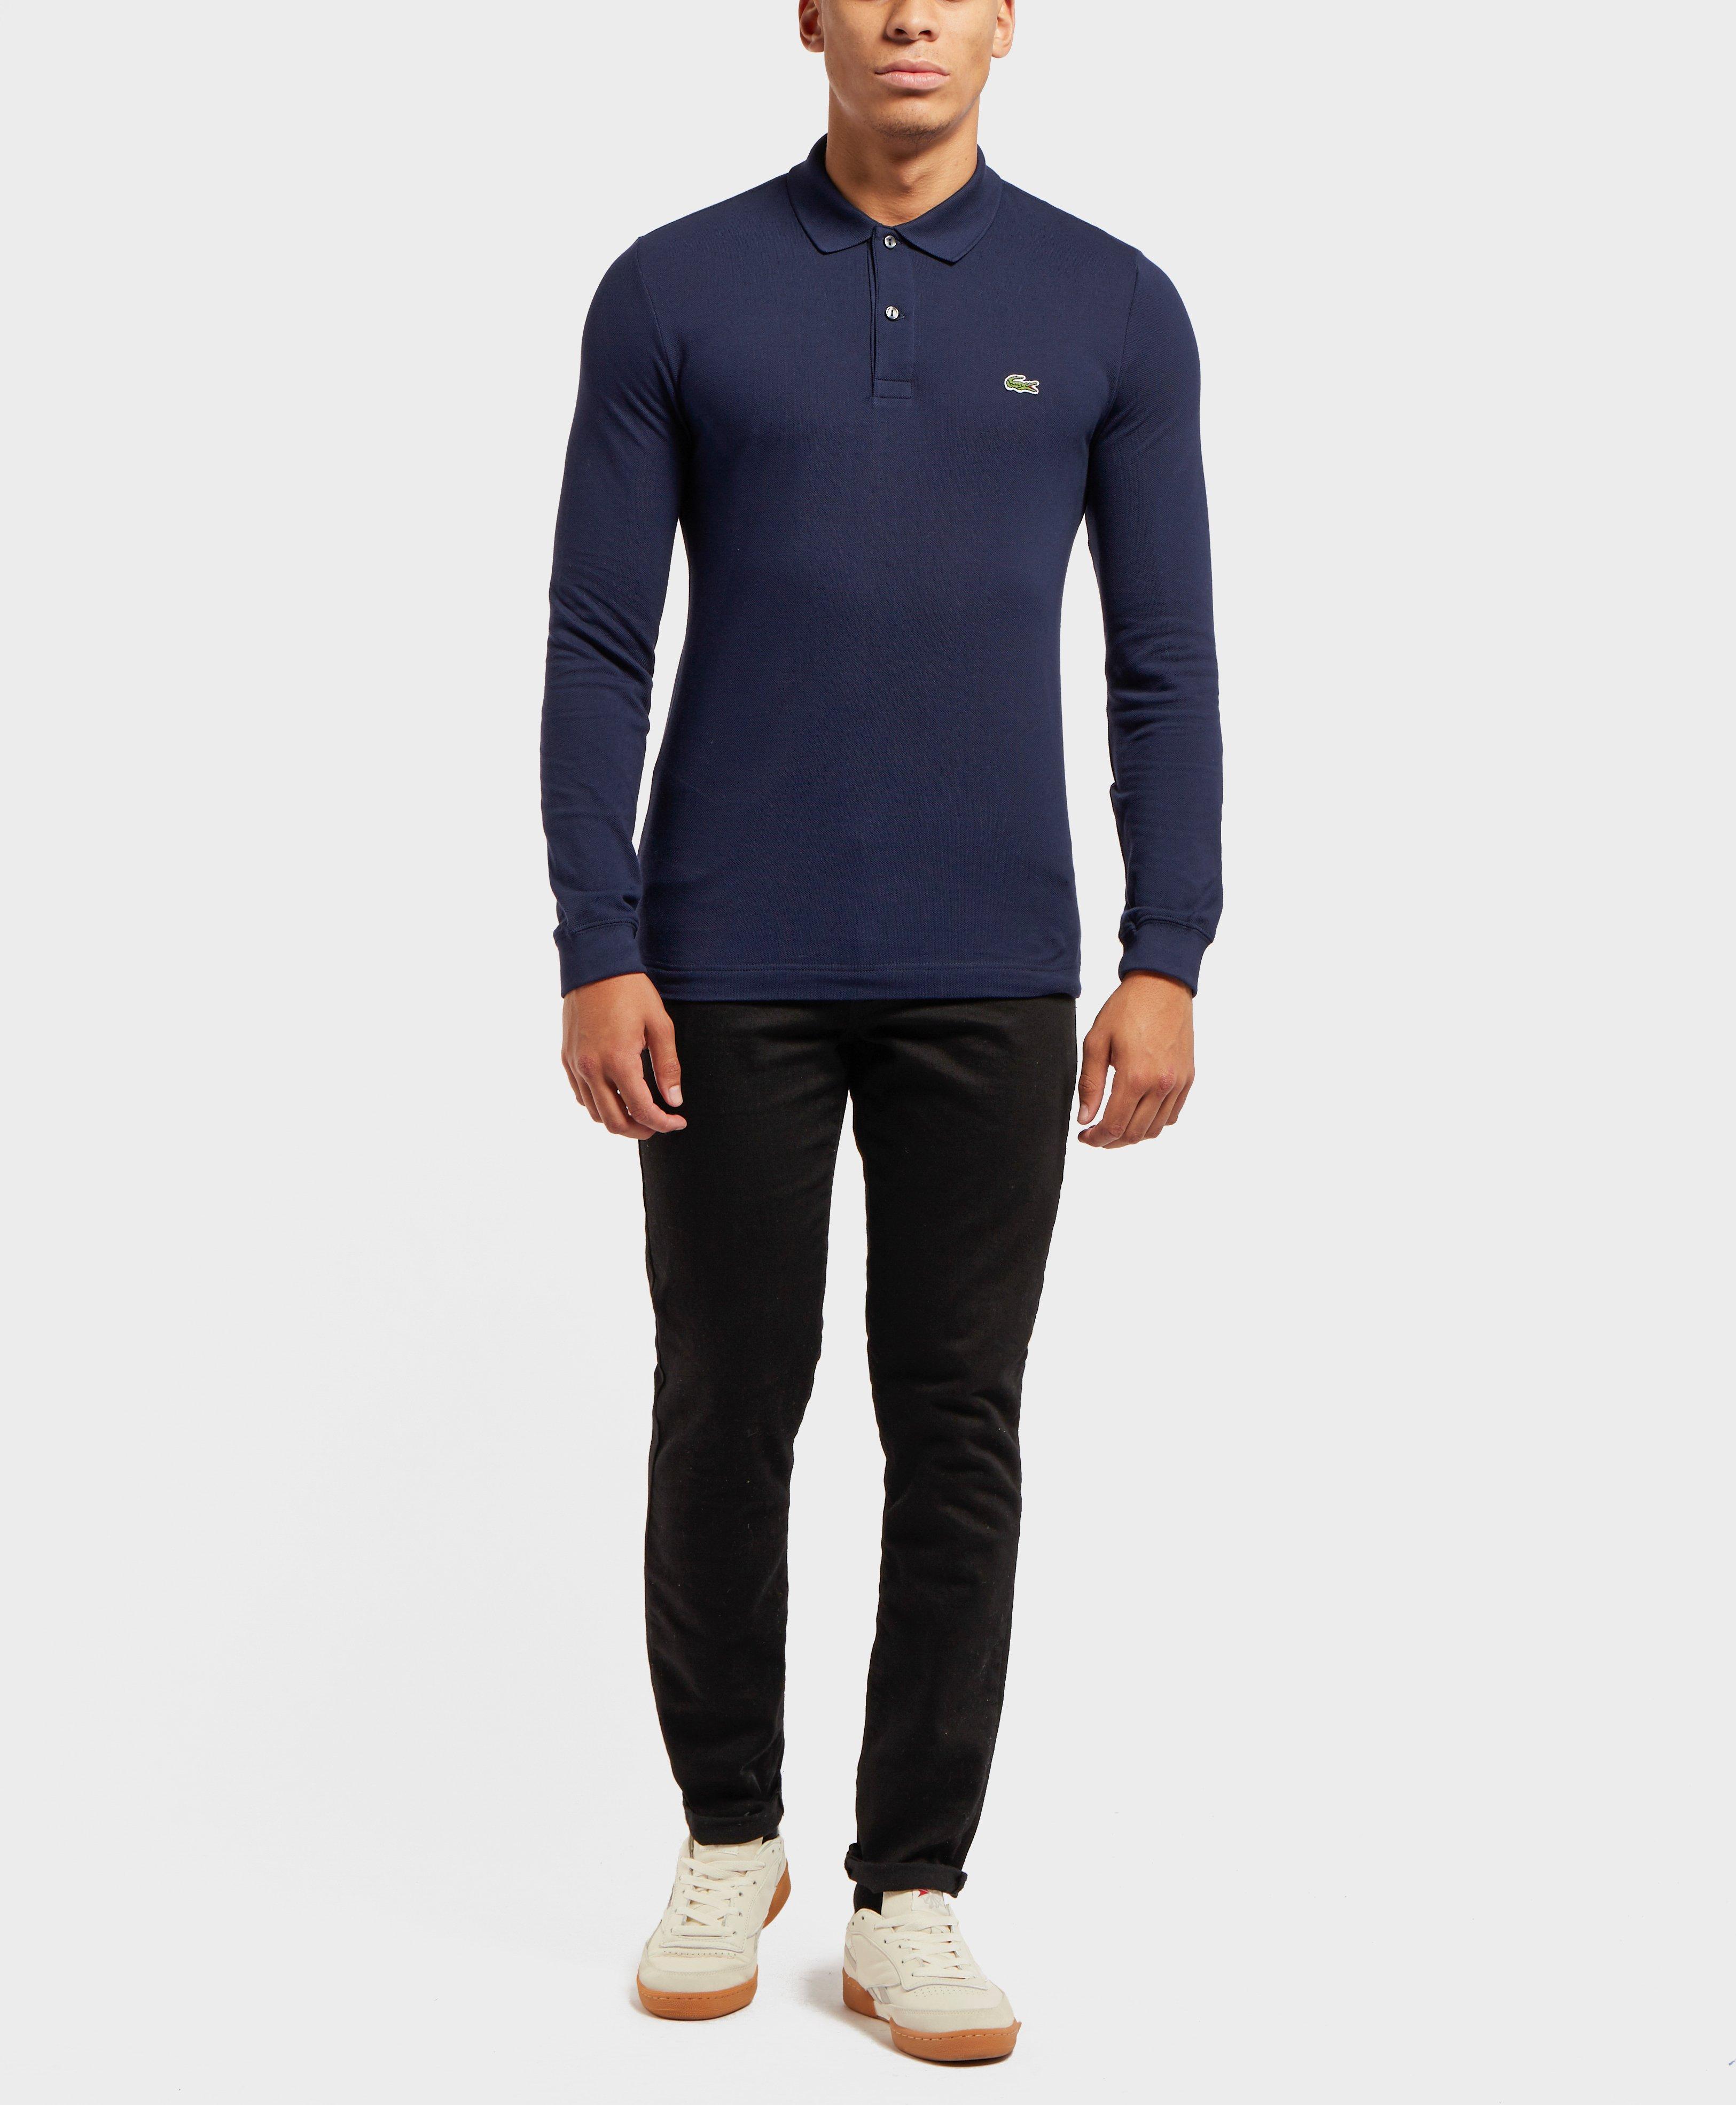 Lacoste Slim Fit Long Sleeve Polo Shirt in Blue for Men -